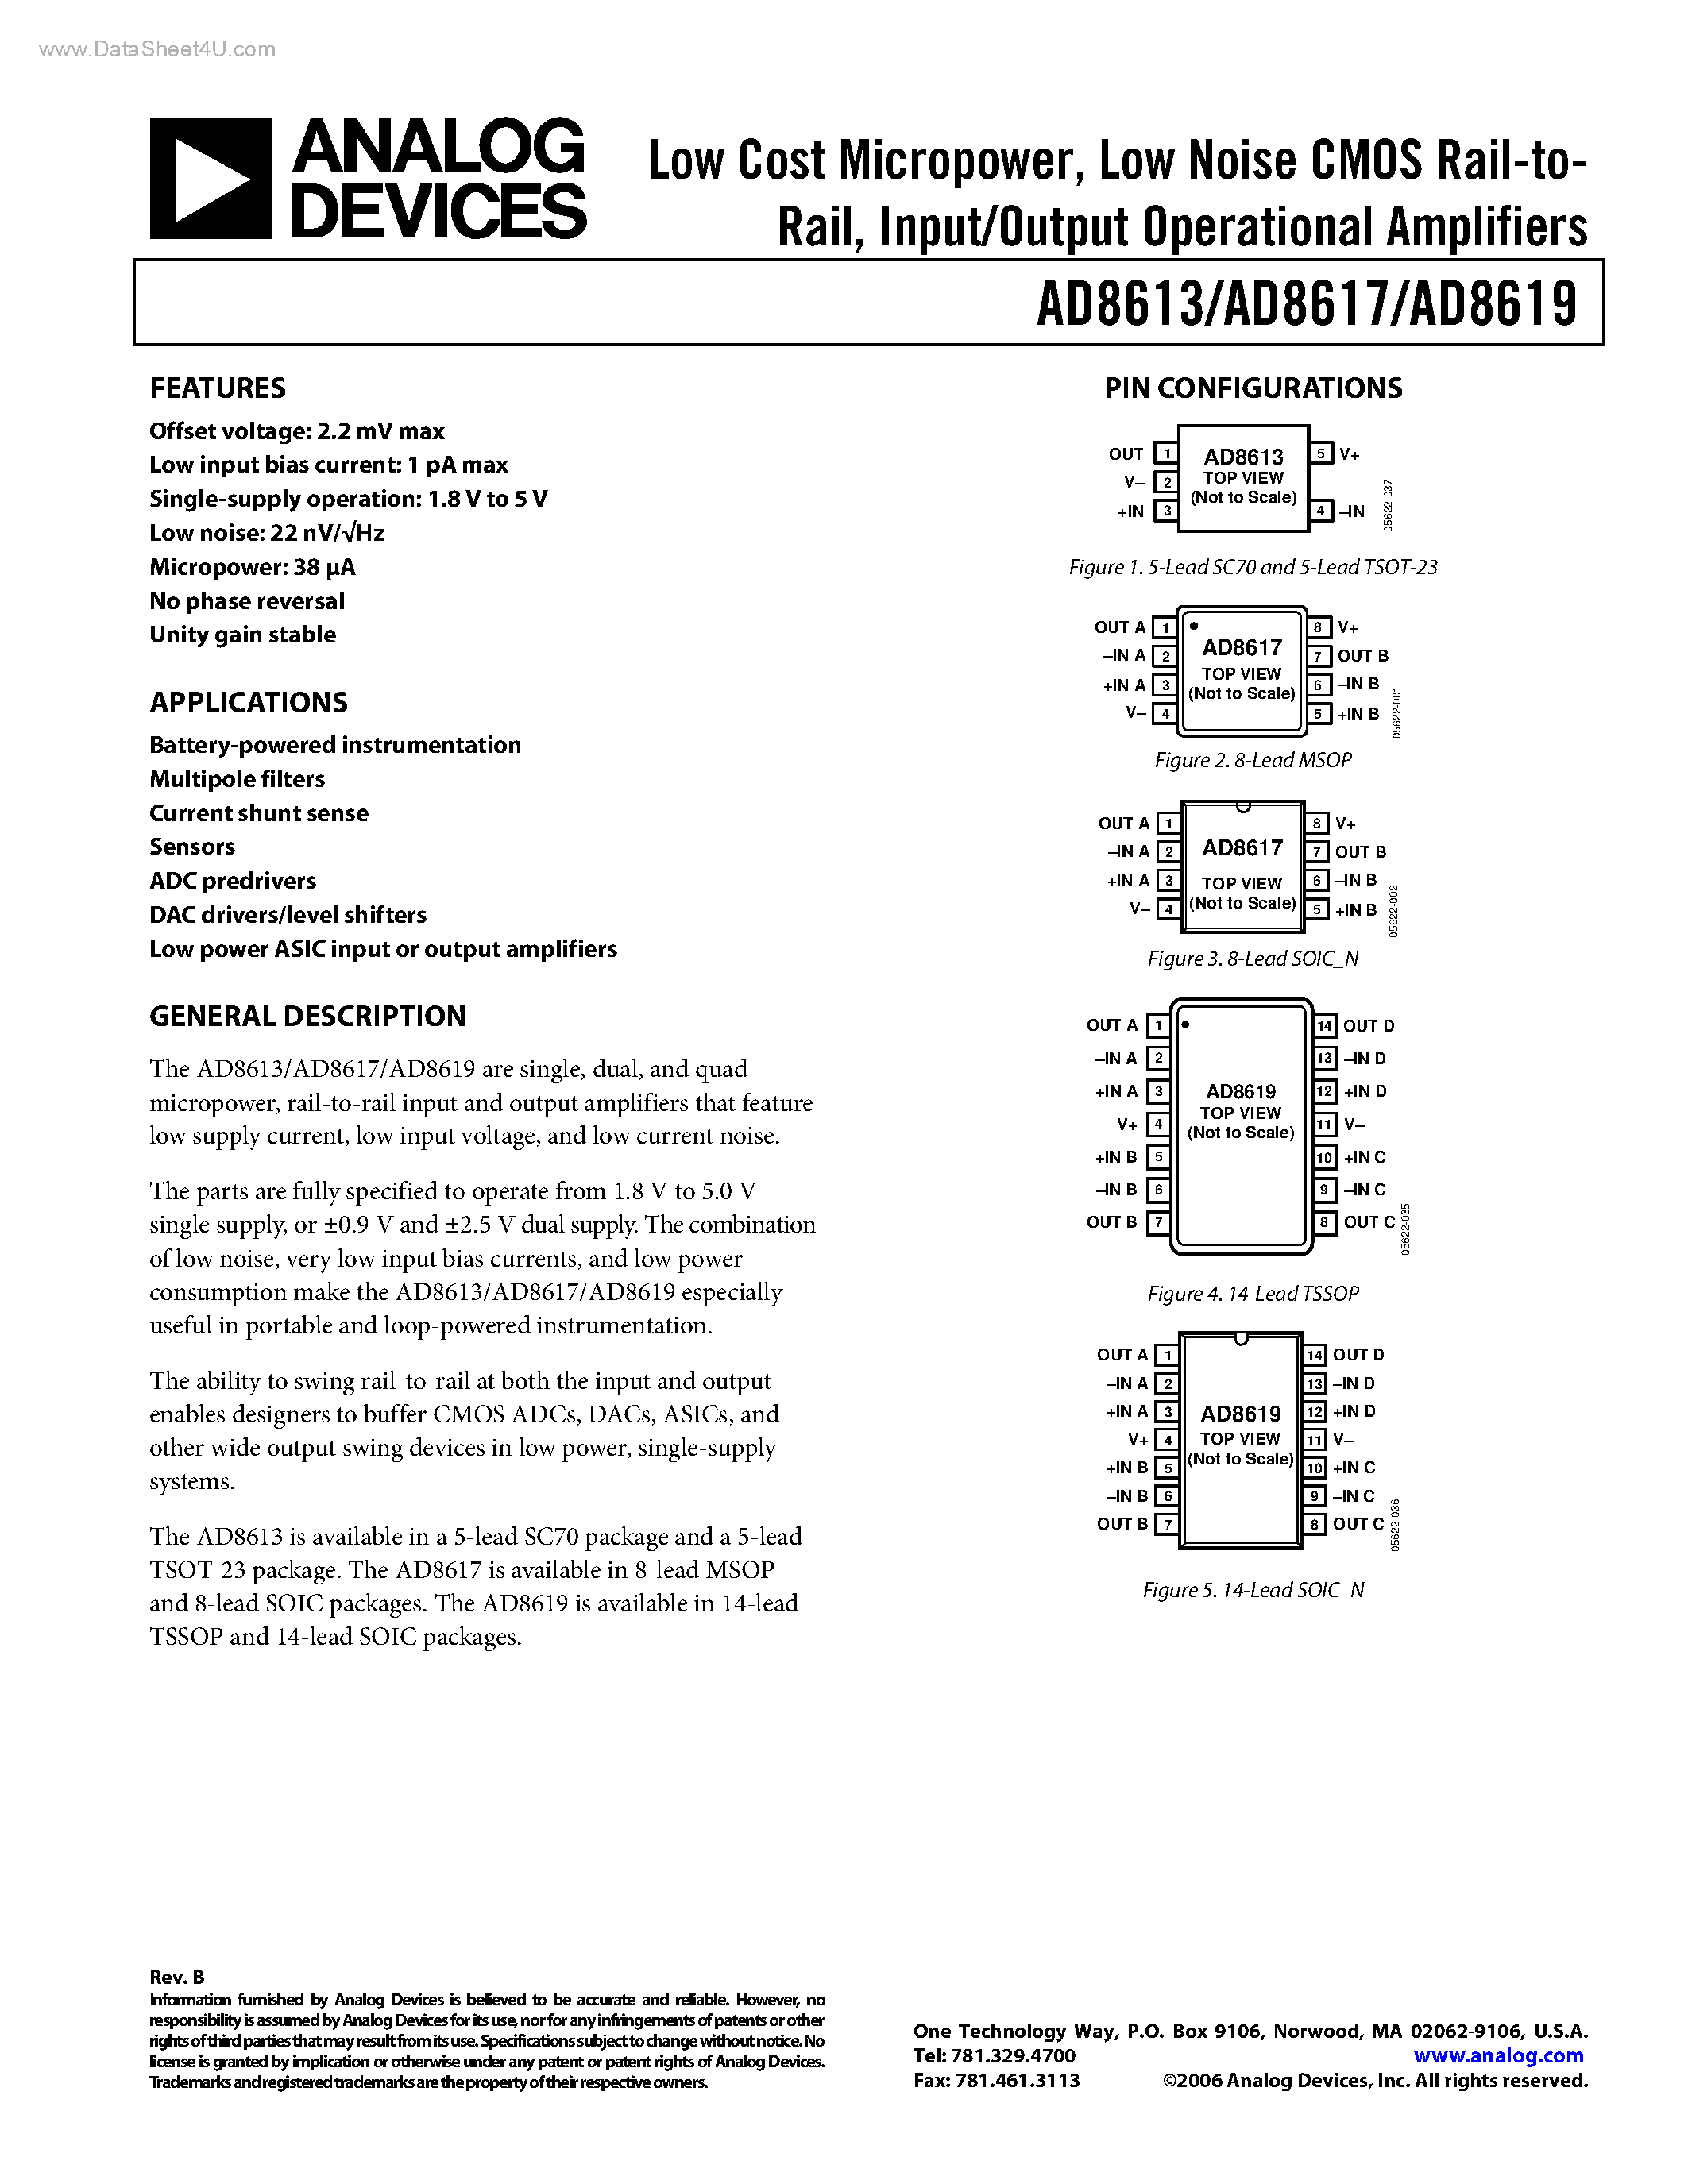 Даташит AD8613 - (AD8613 - AD8619) Input/Output Operational Amplifiers страница 1